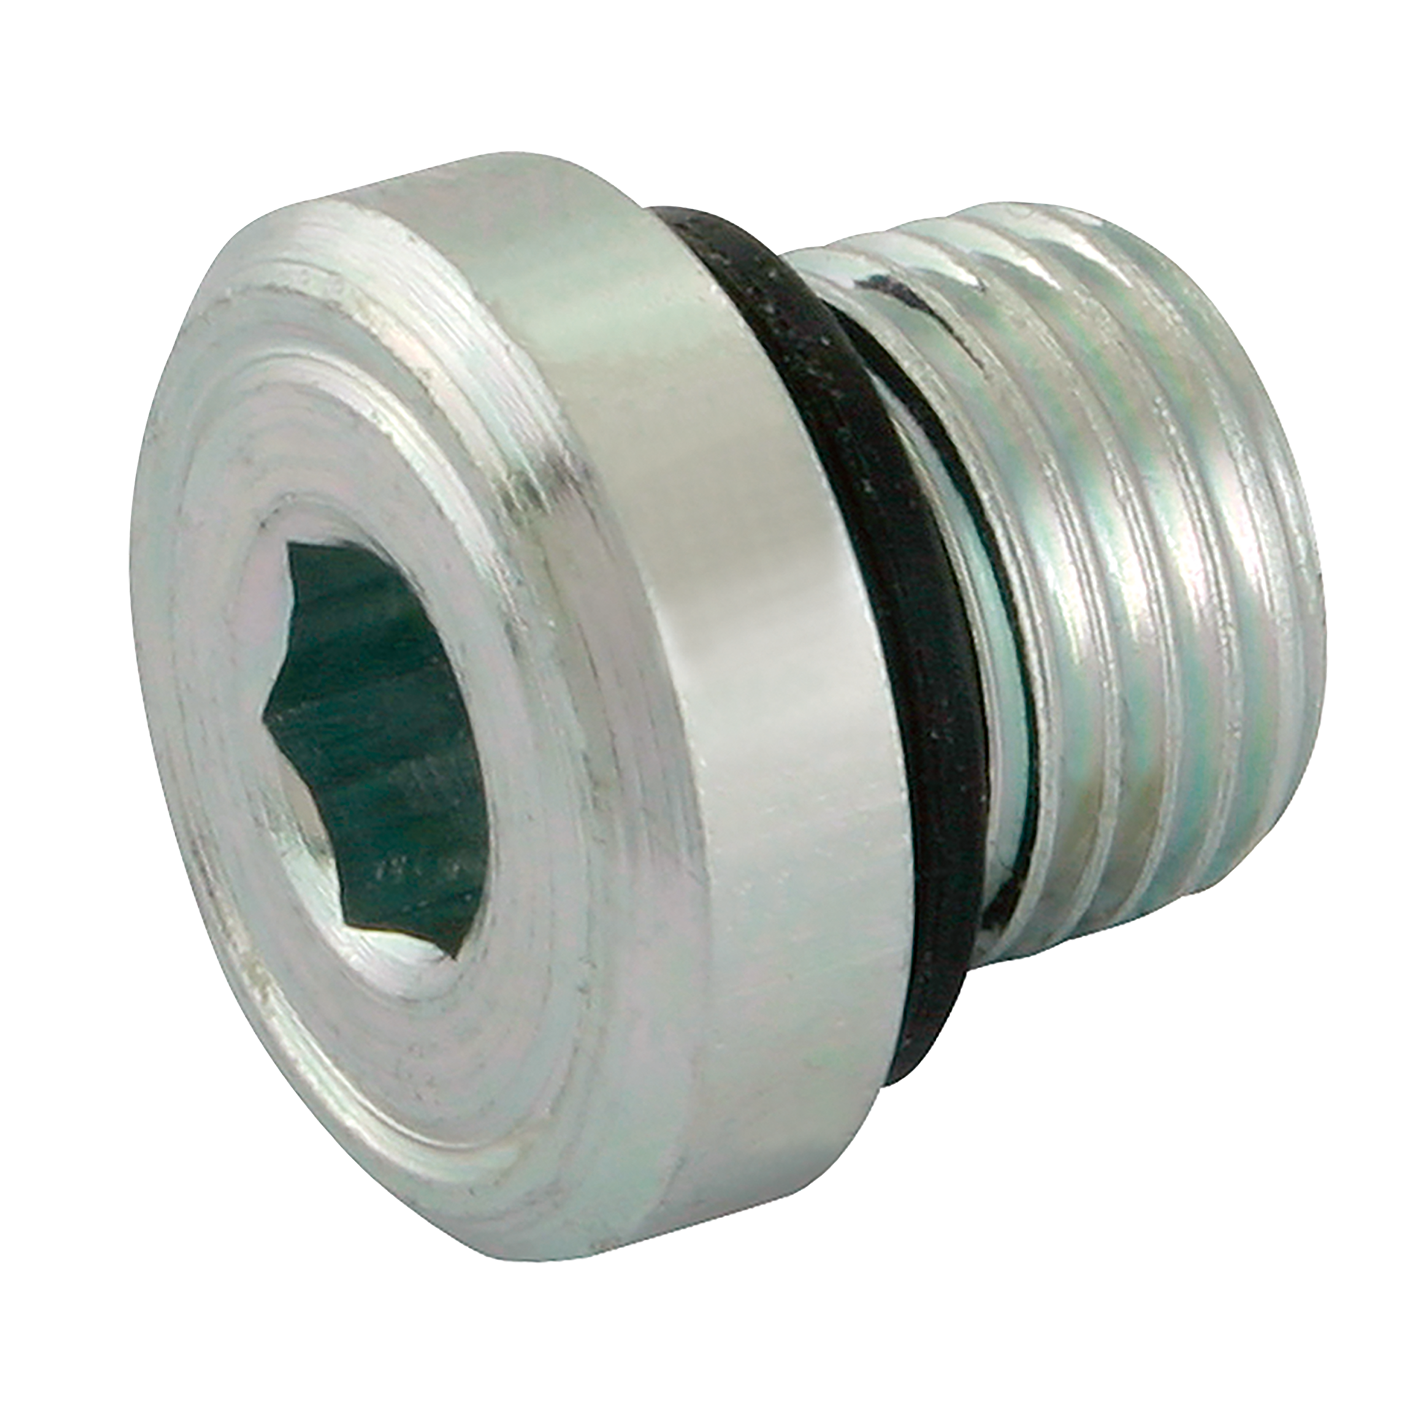 1.1/2"BSPP MALE BLANKING PLUG andSEAL NBR